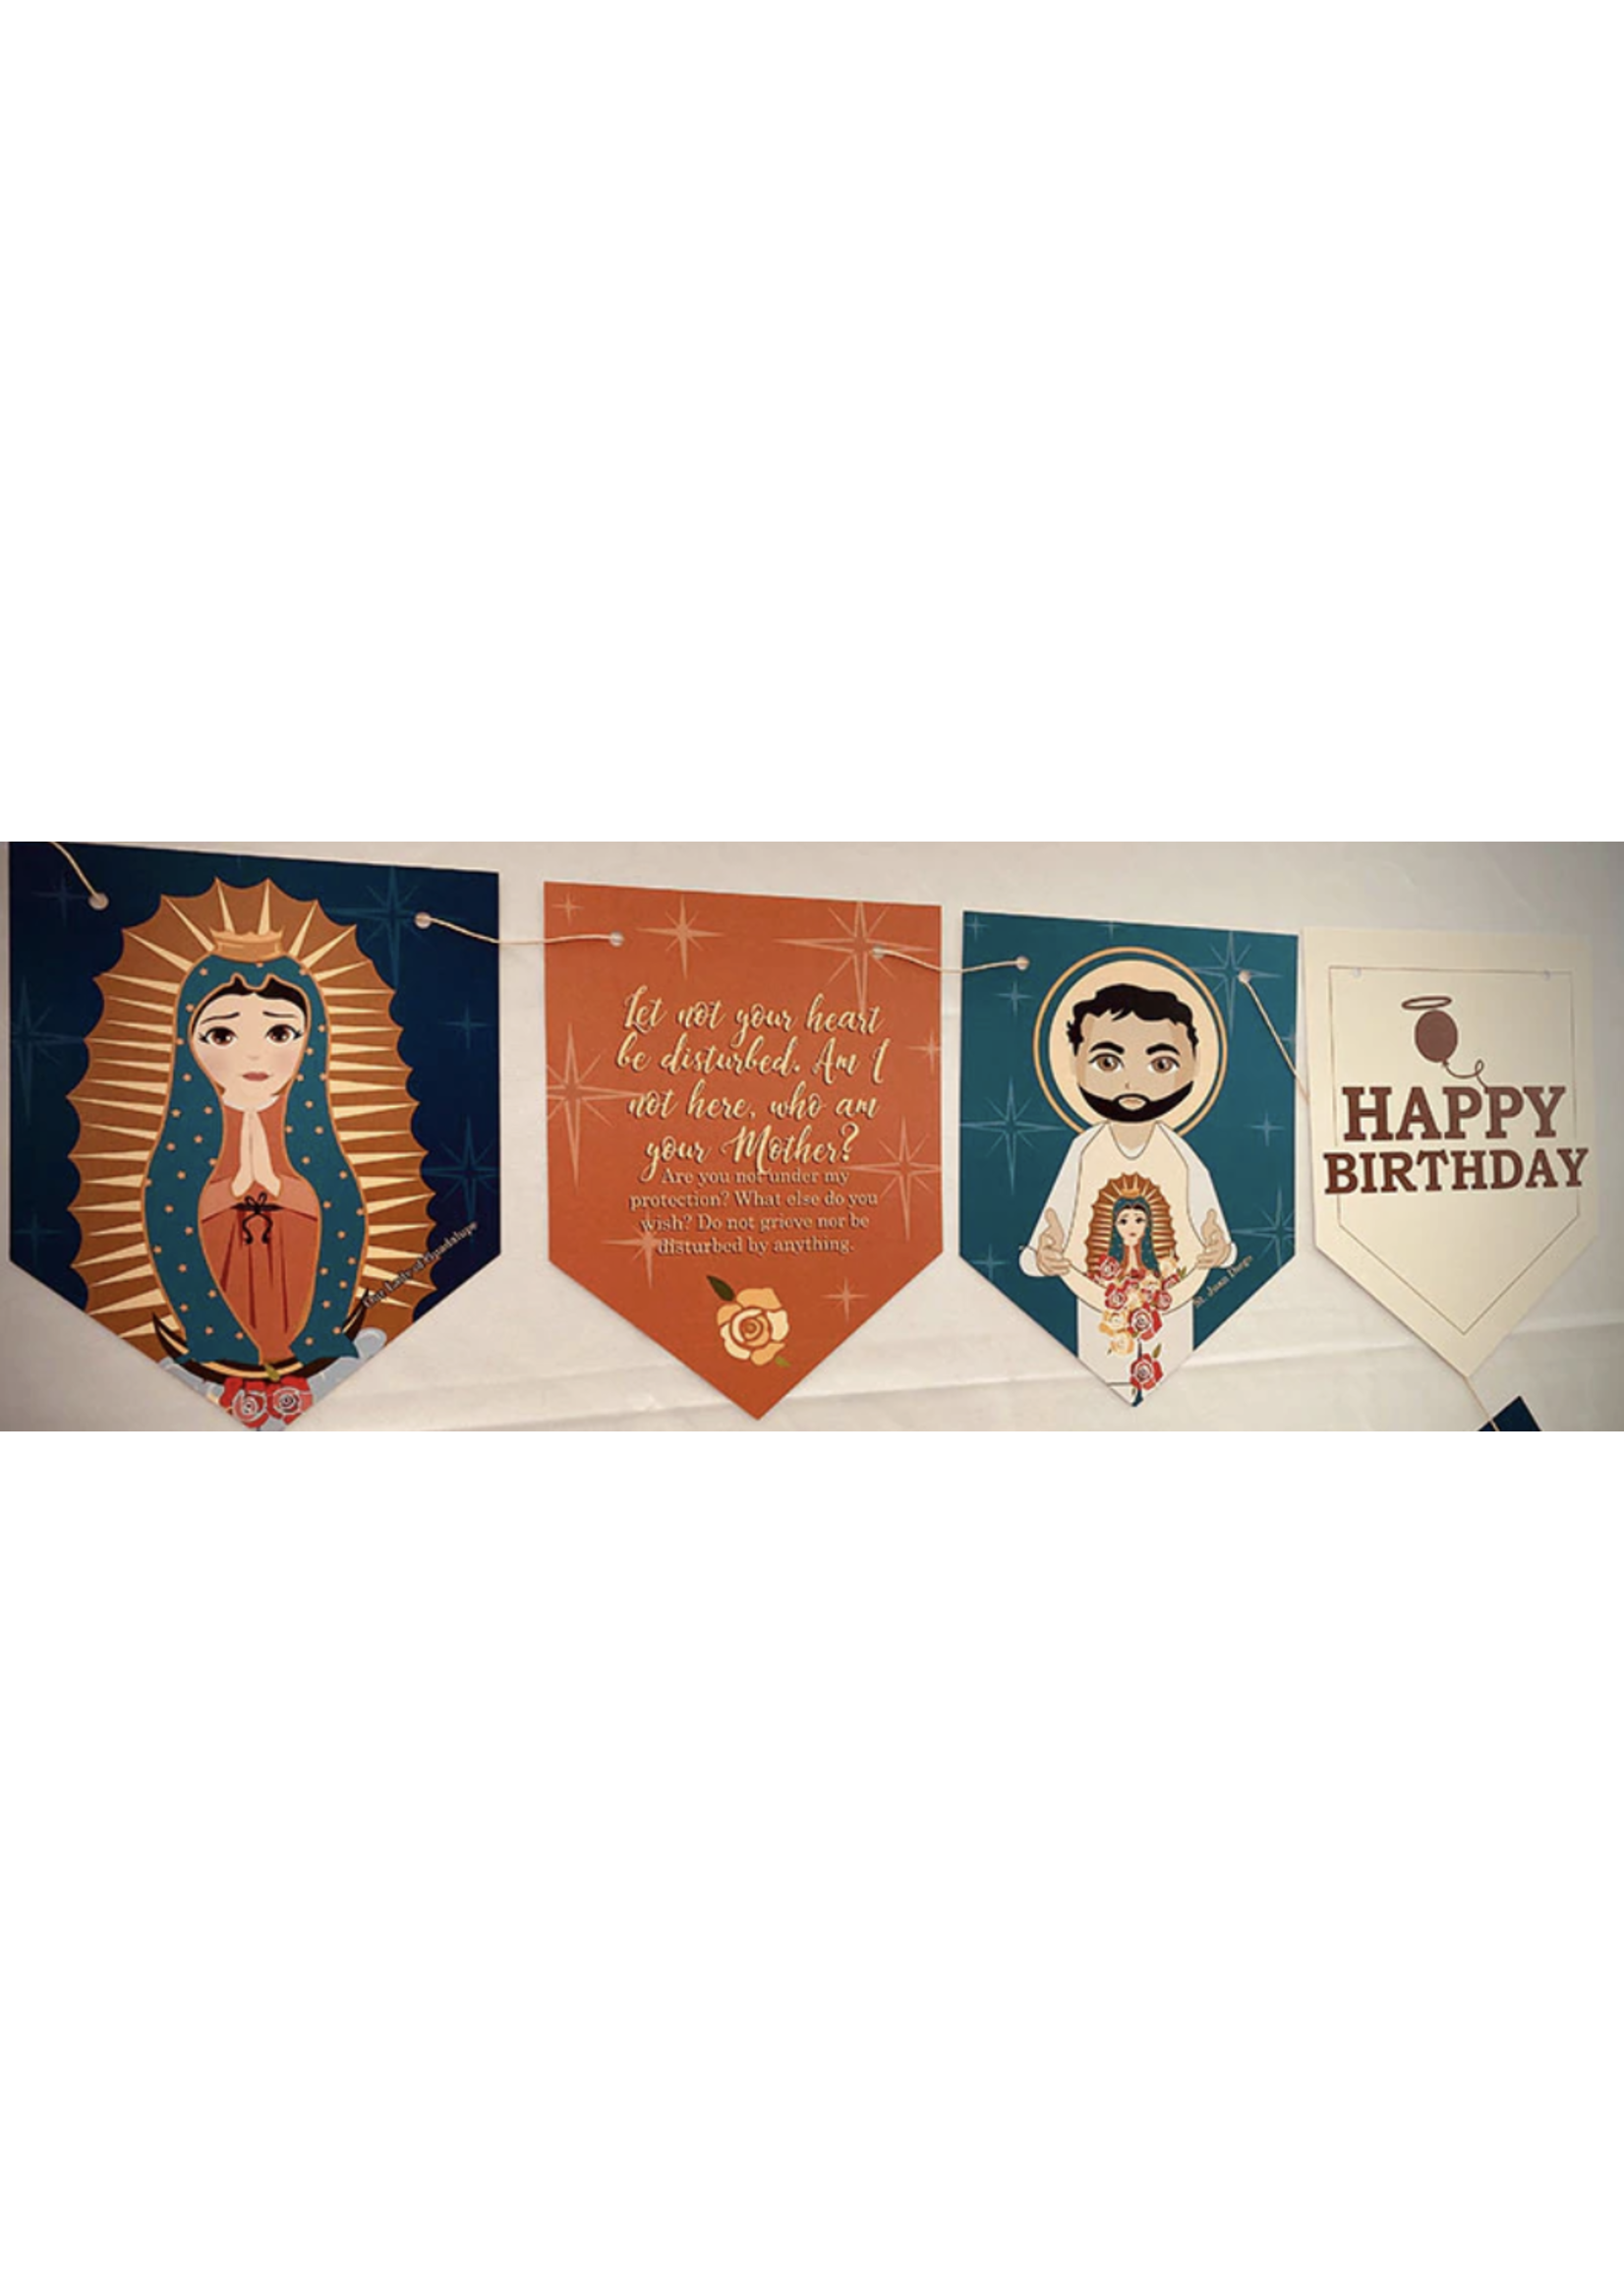 Party like a Saint Our Lady of Guadalupe/ St Juan Diego Party Decorations